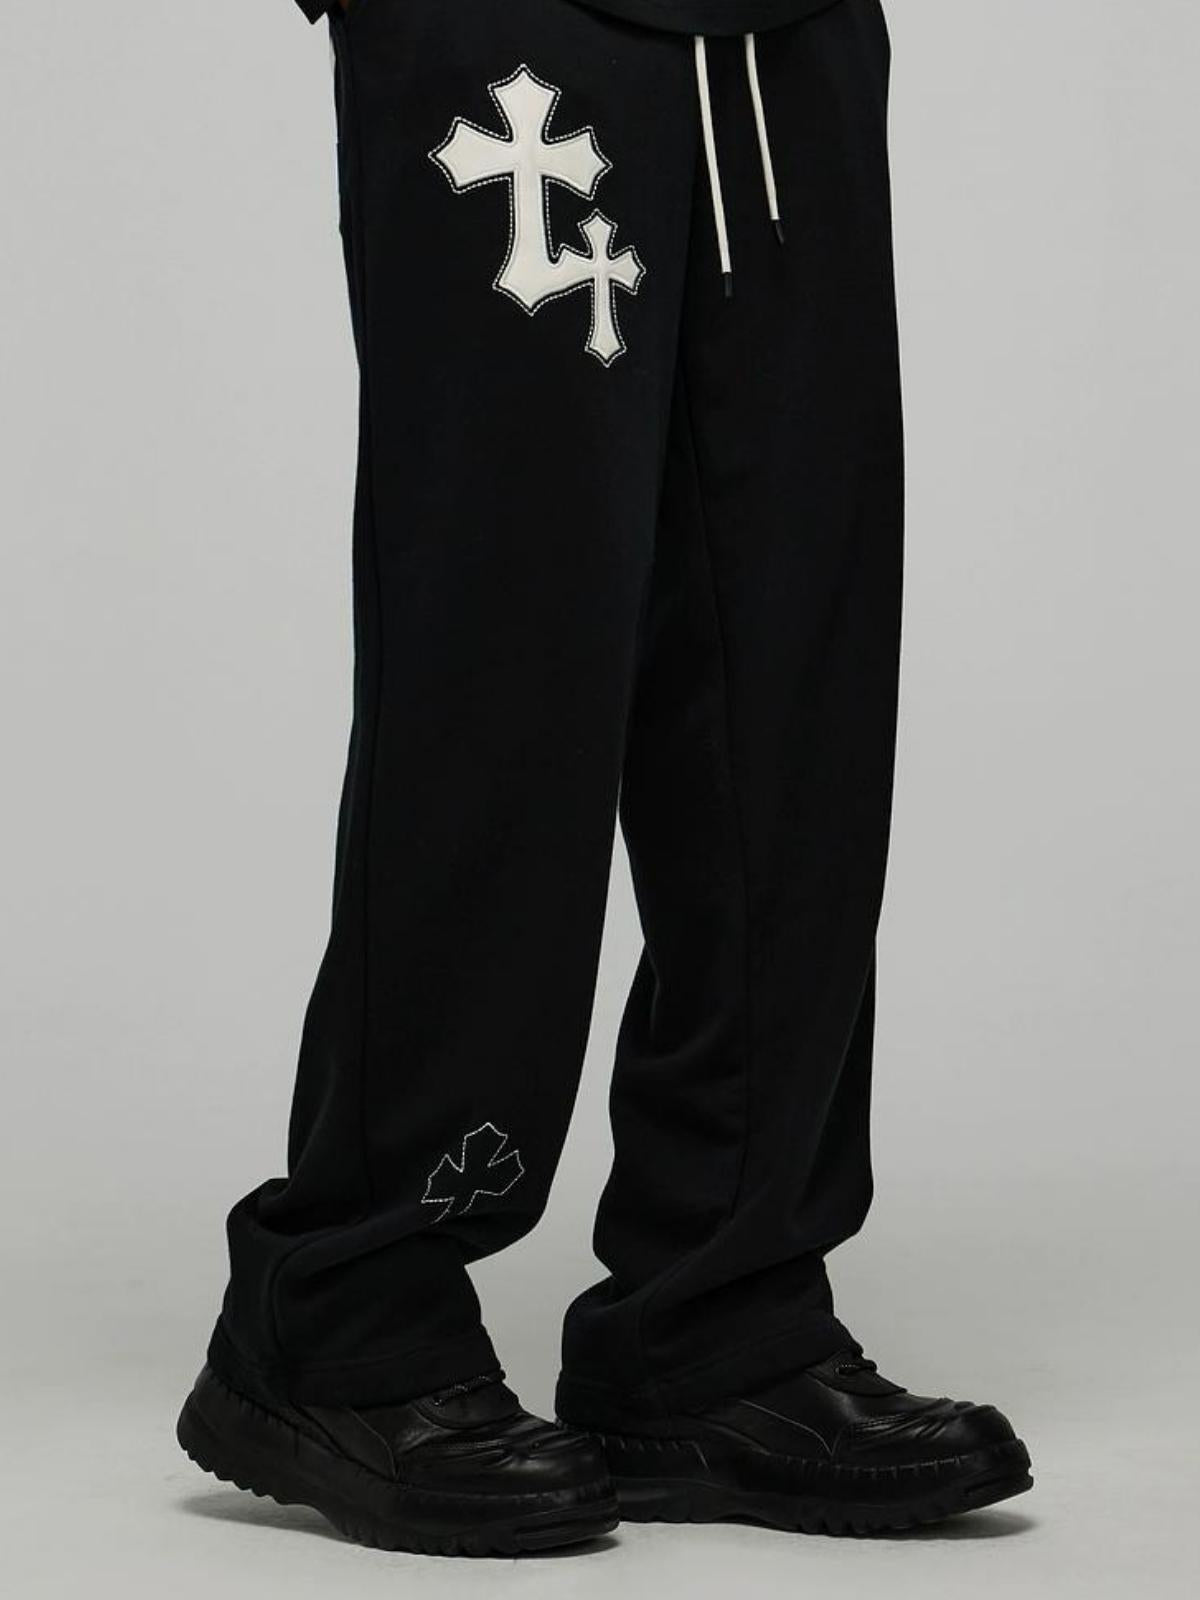 We Love Street Cross Embroidered Casual Pants Loose Sweatpants